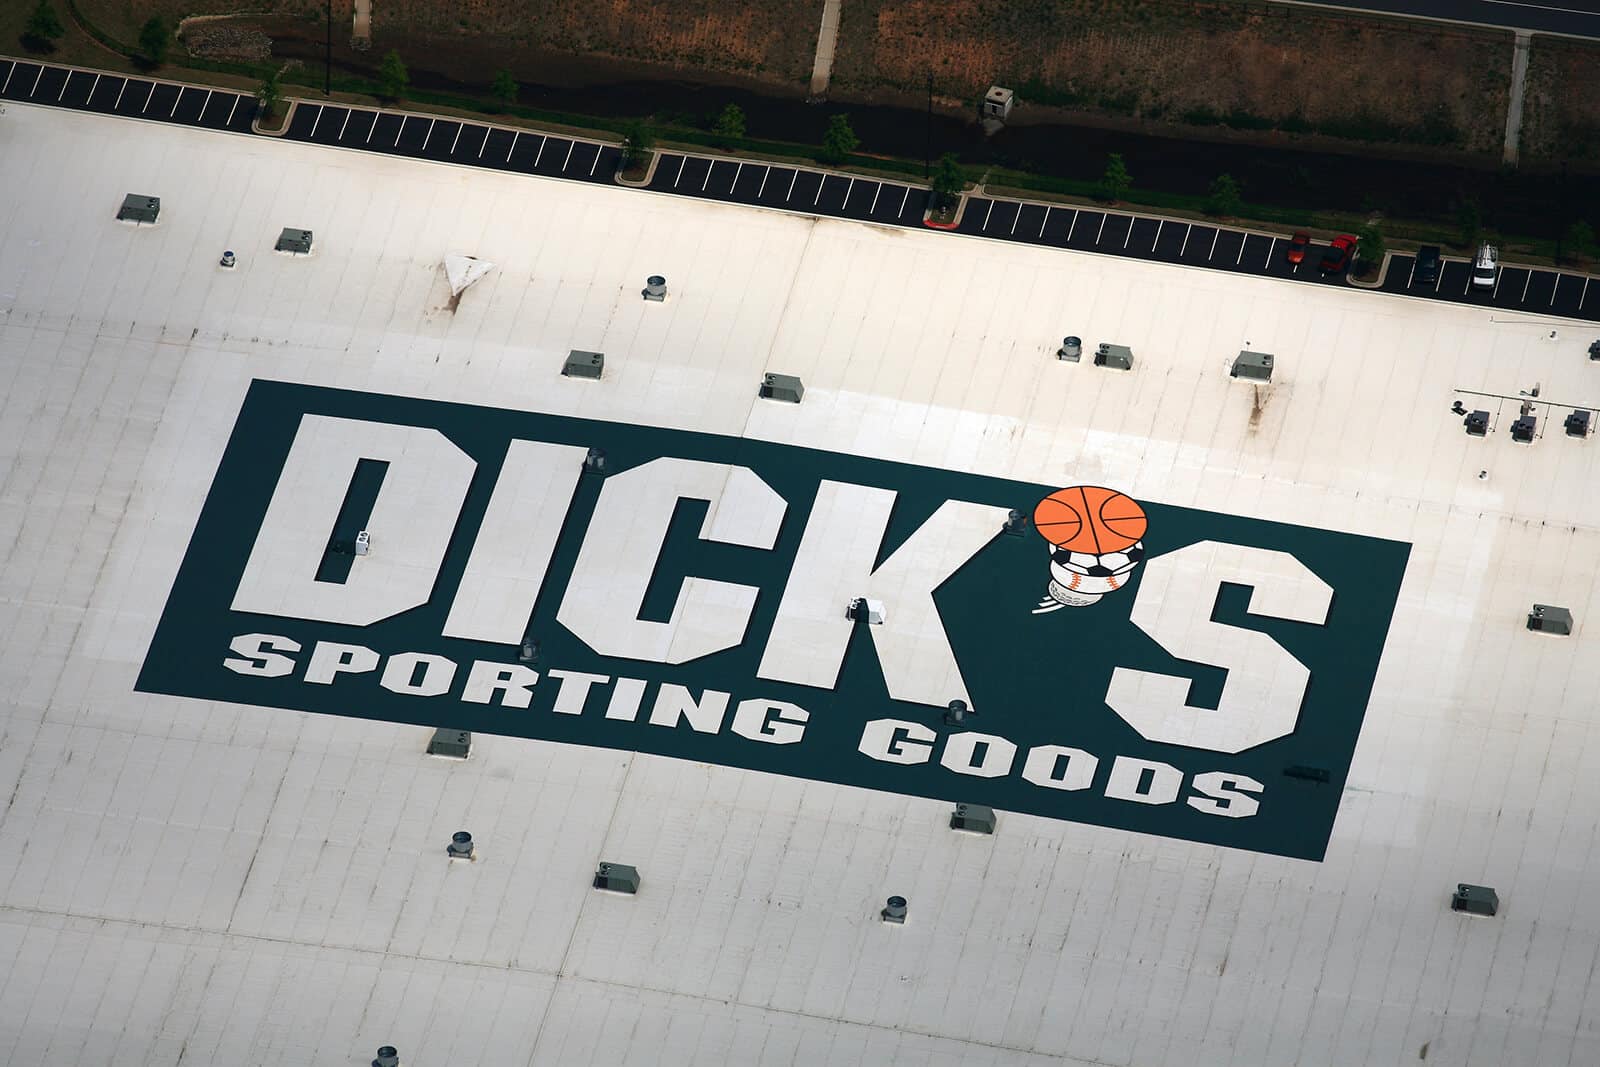 Dick's sporting goods roof logo project